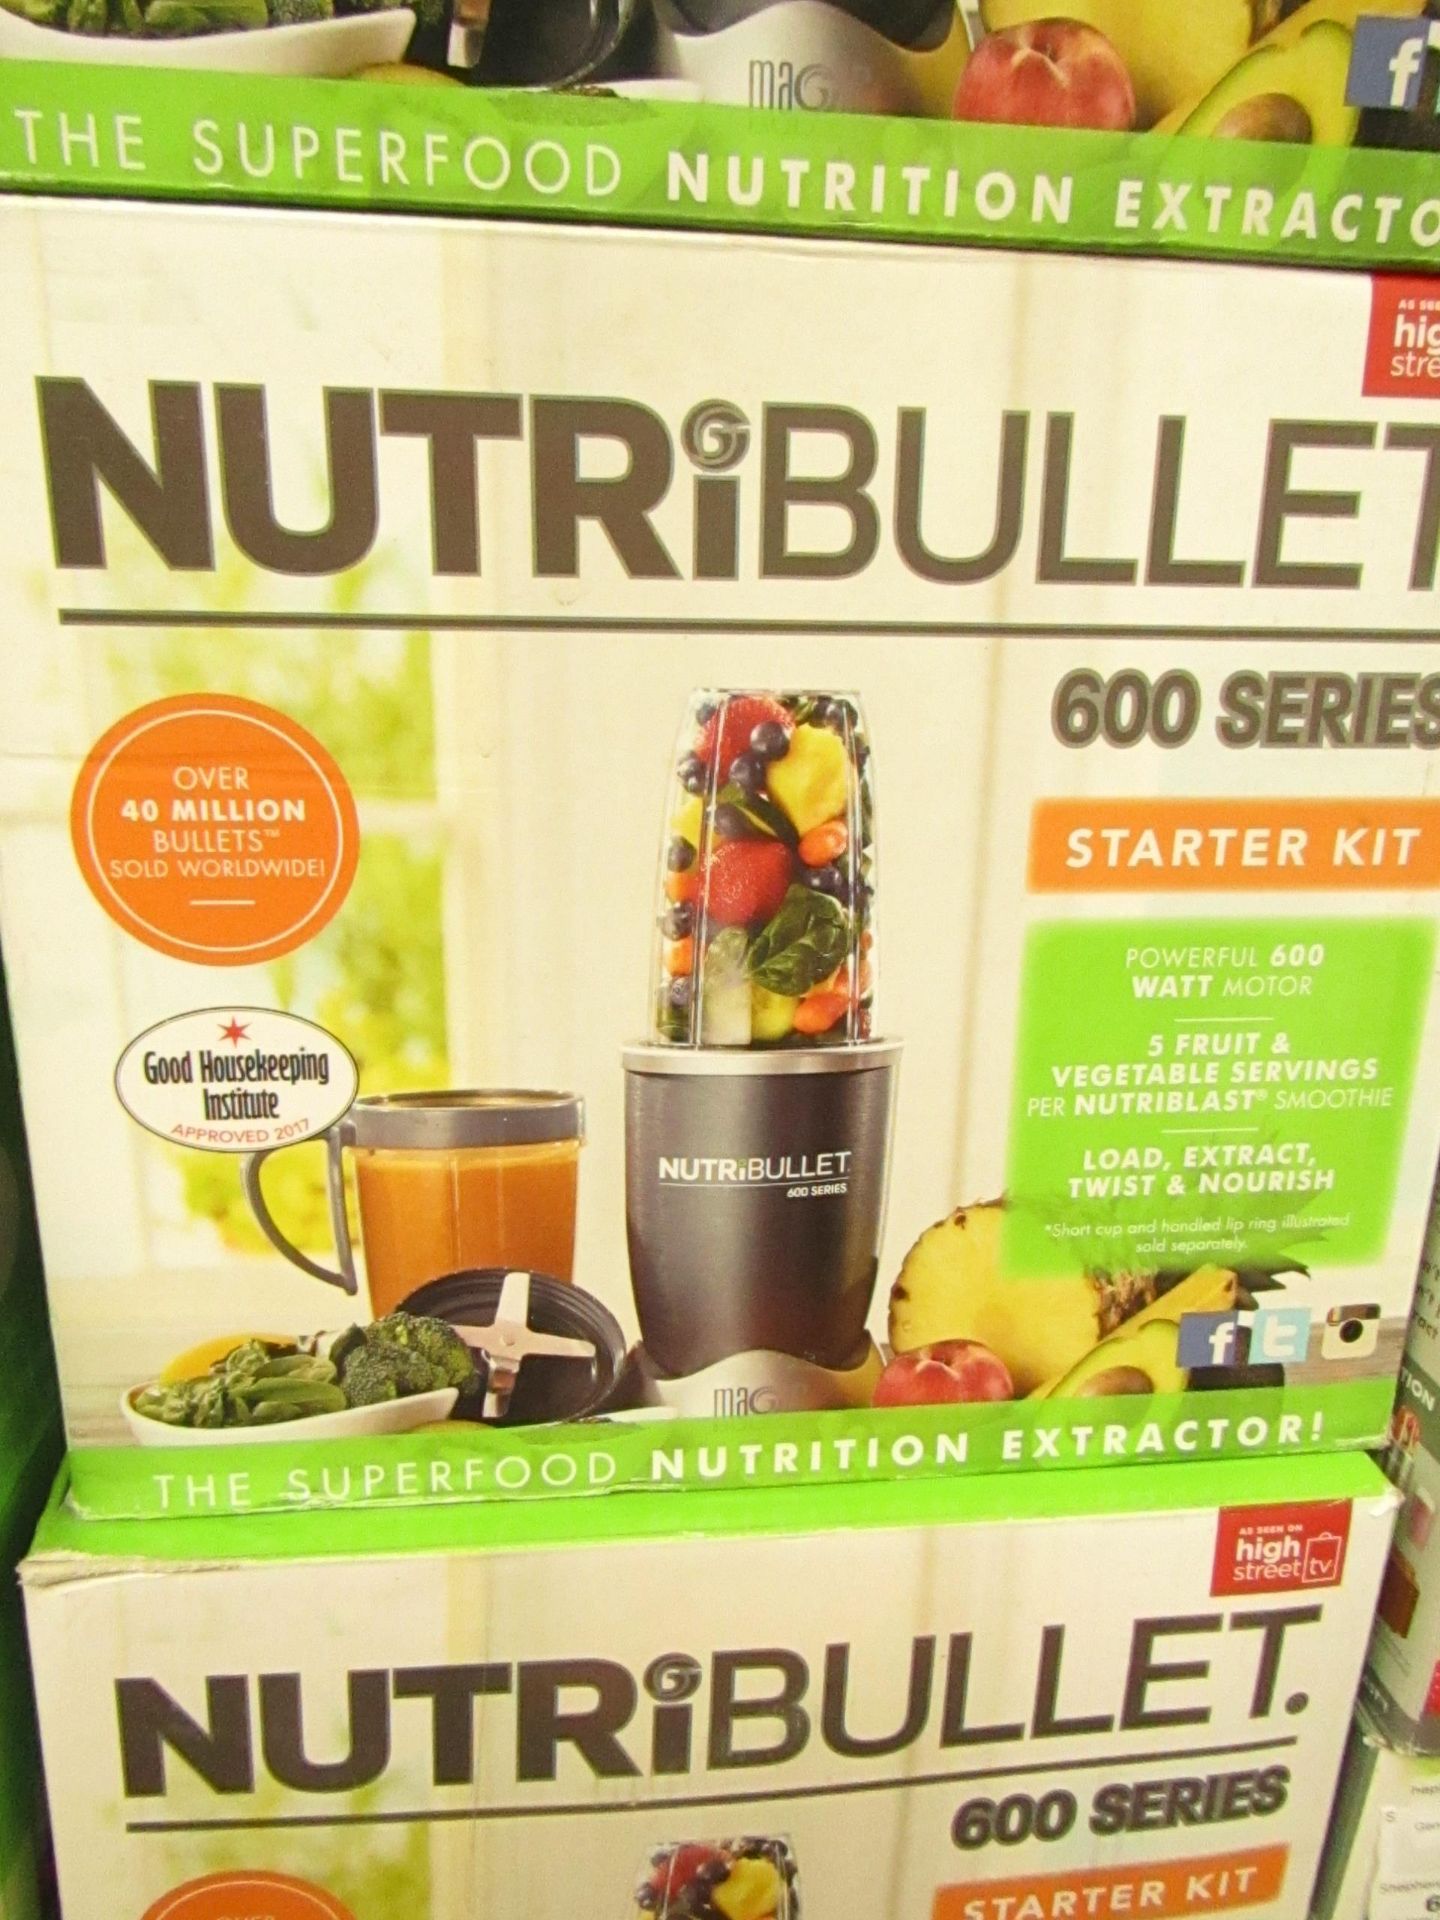 | 1x | NUTRIBULLET 600 SERIES STARTER KIT | UNCHECKED AND BOXED | NO ONLINE RE-SALE | SKU